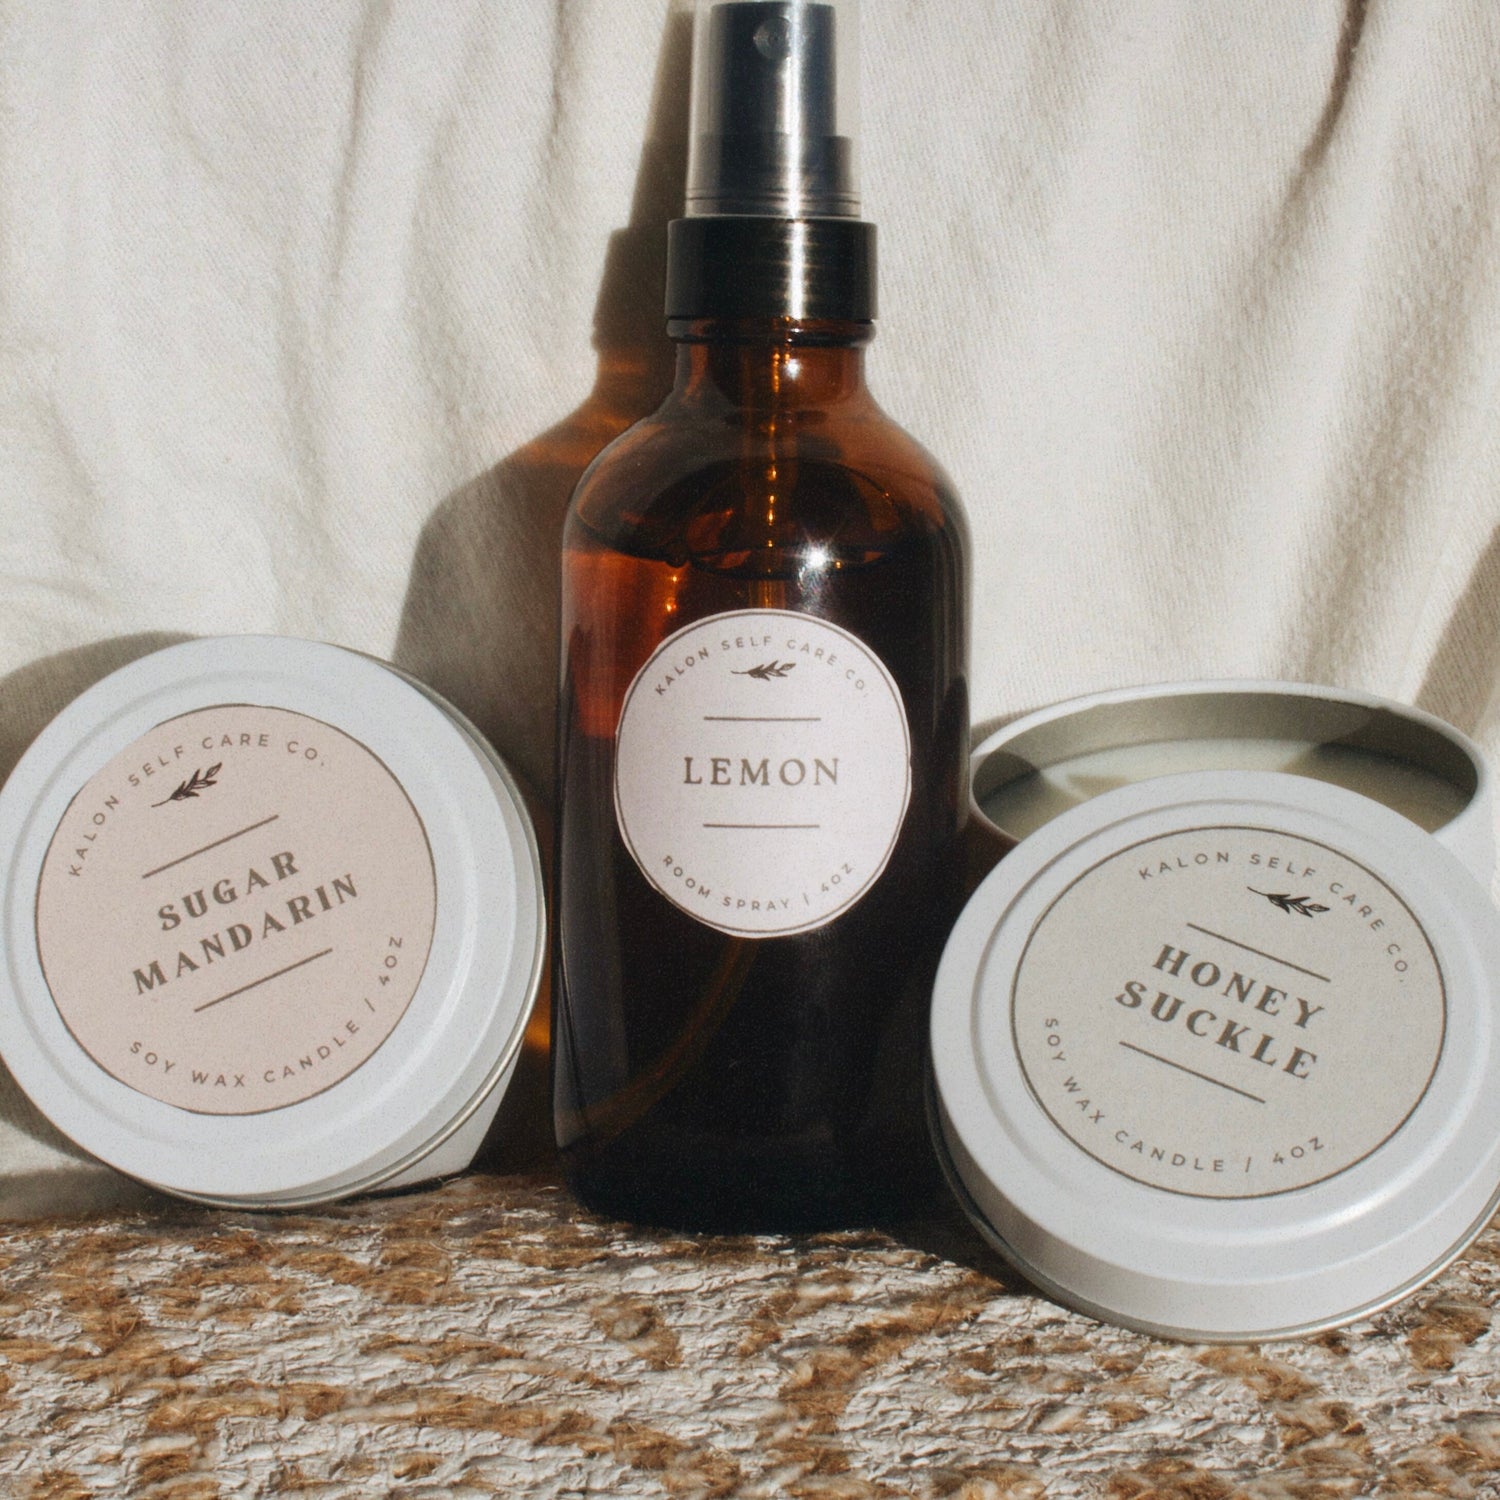 The Fresh Spring Trio: Honeysuckle, Mandarin, and Lemon, Room Spray, Linen Spray, Soy Candles, Wood Wick Candles, Gifts for Women, Gift Box